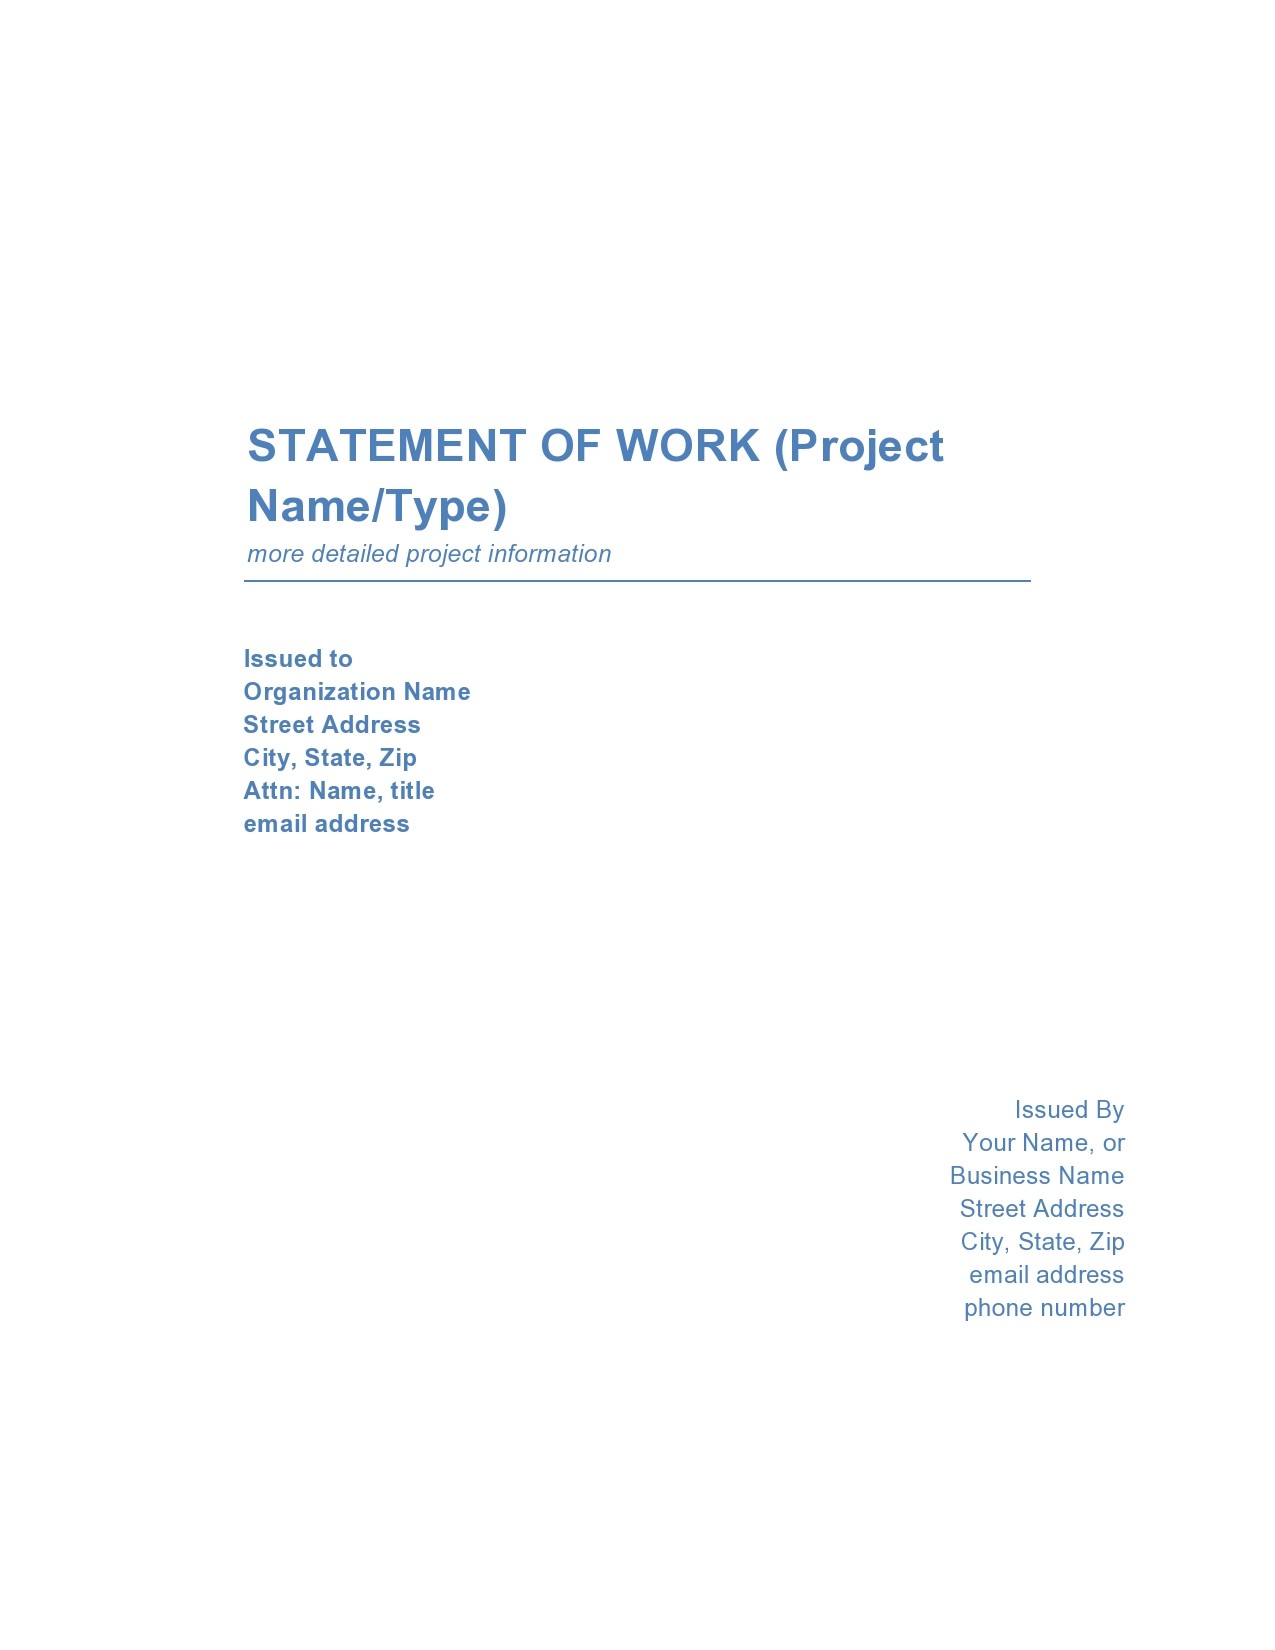 statement of work template research